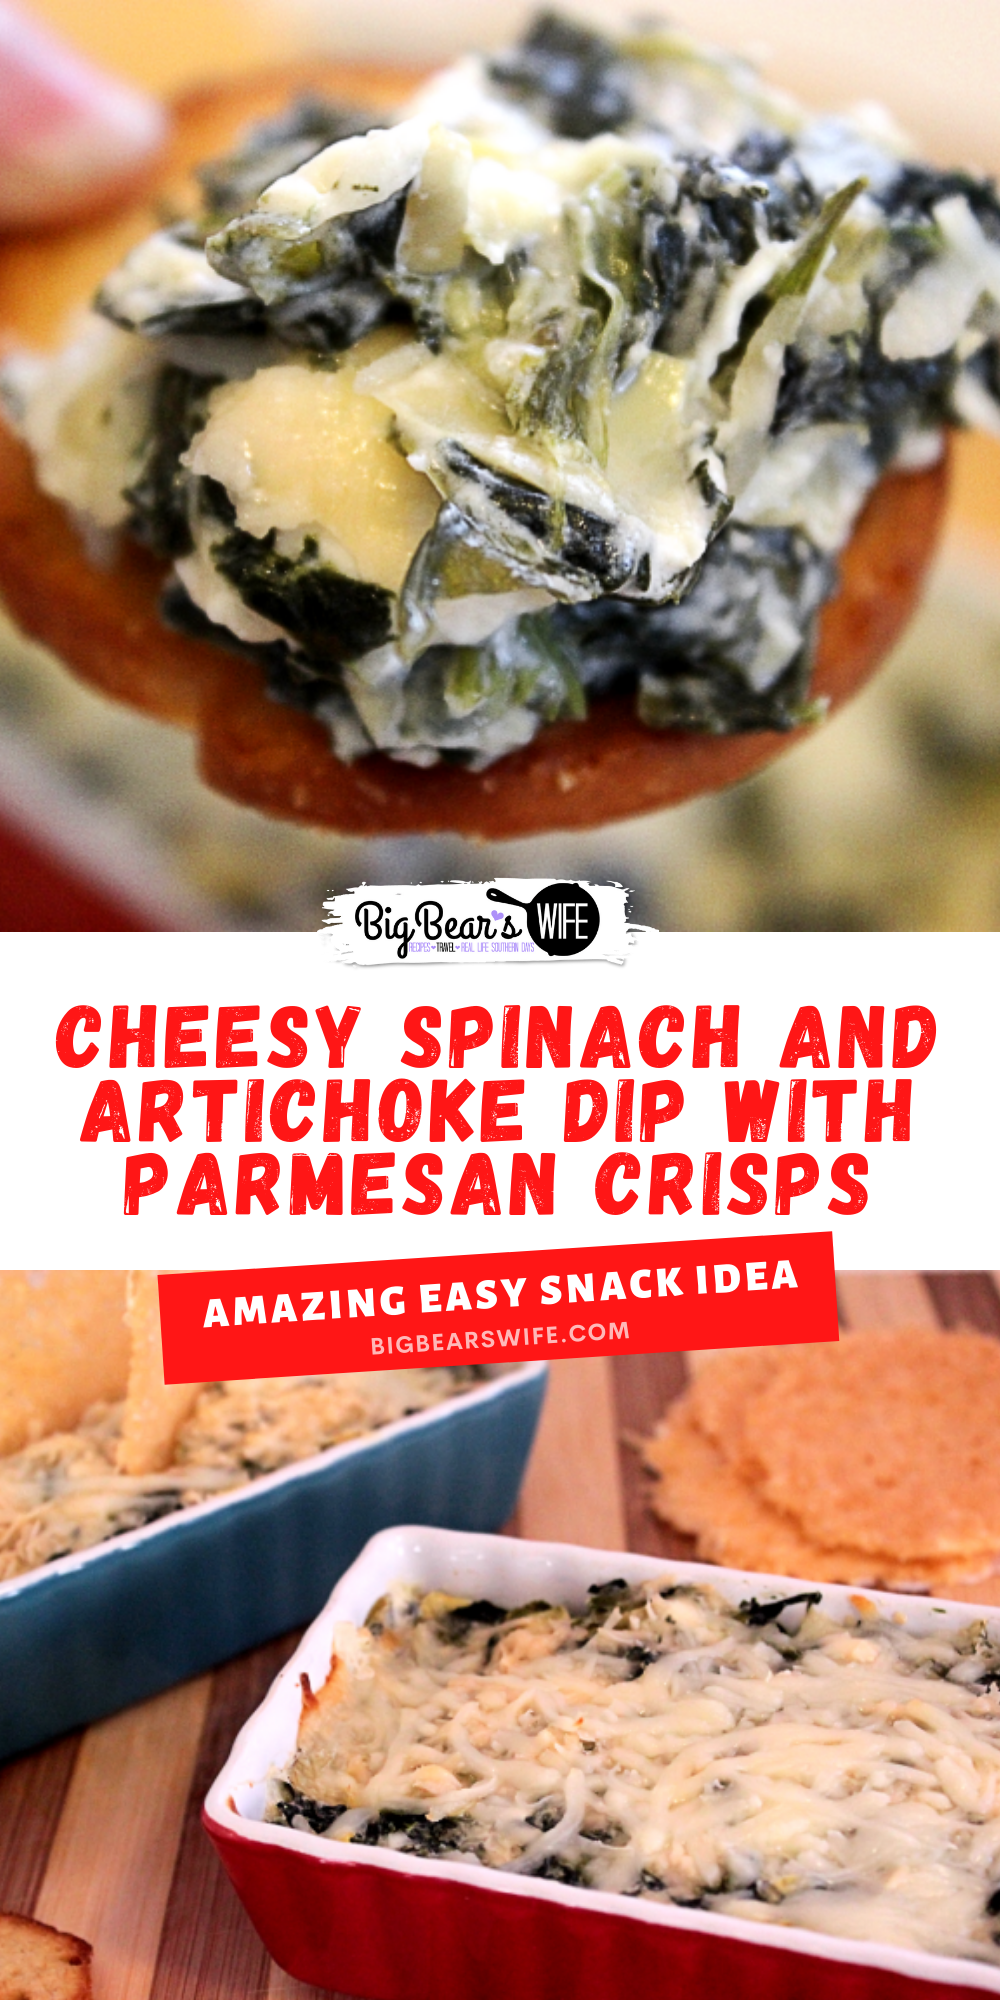 A super delicious Cheesy Spinach and Artichoke Dip with Parmesan Crisps that's perfect for parties and holidays! via @bigbearswife